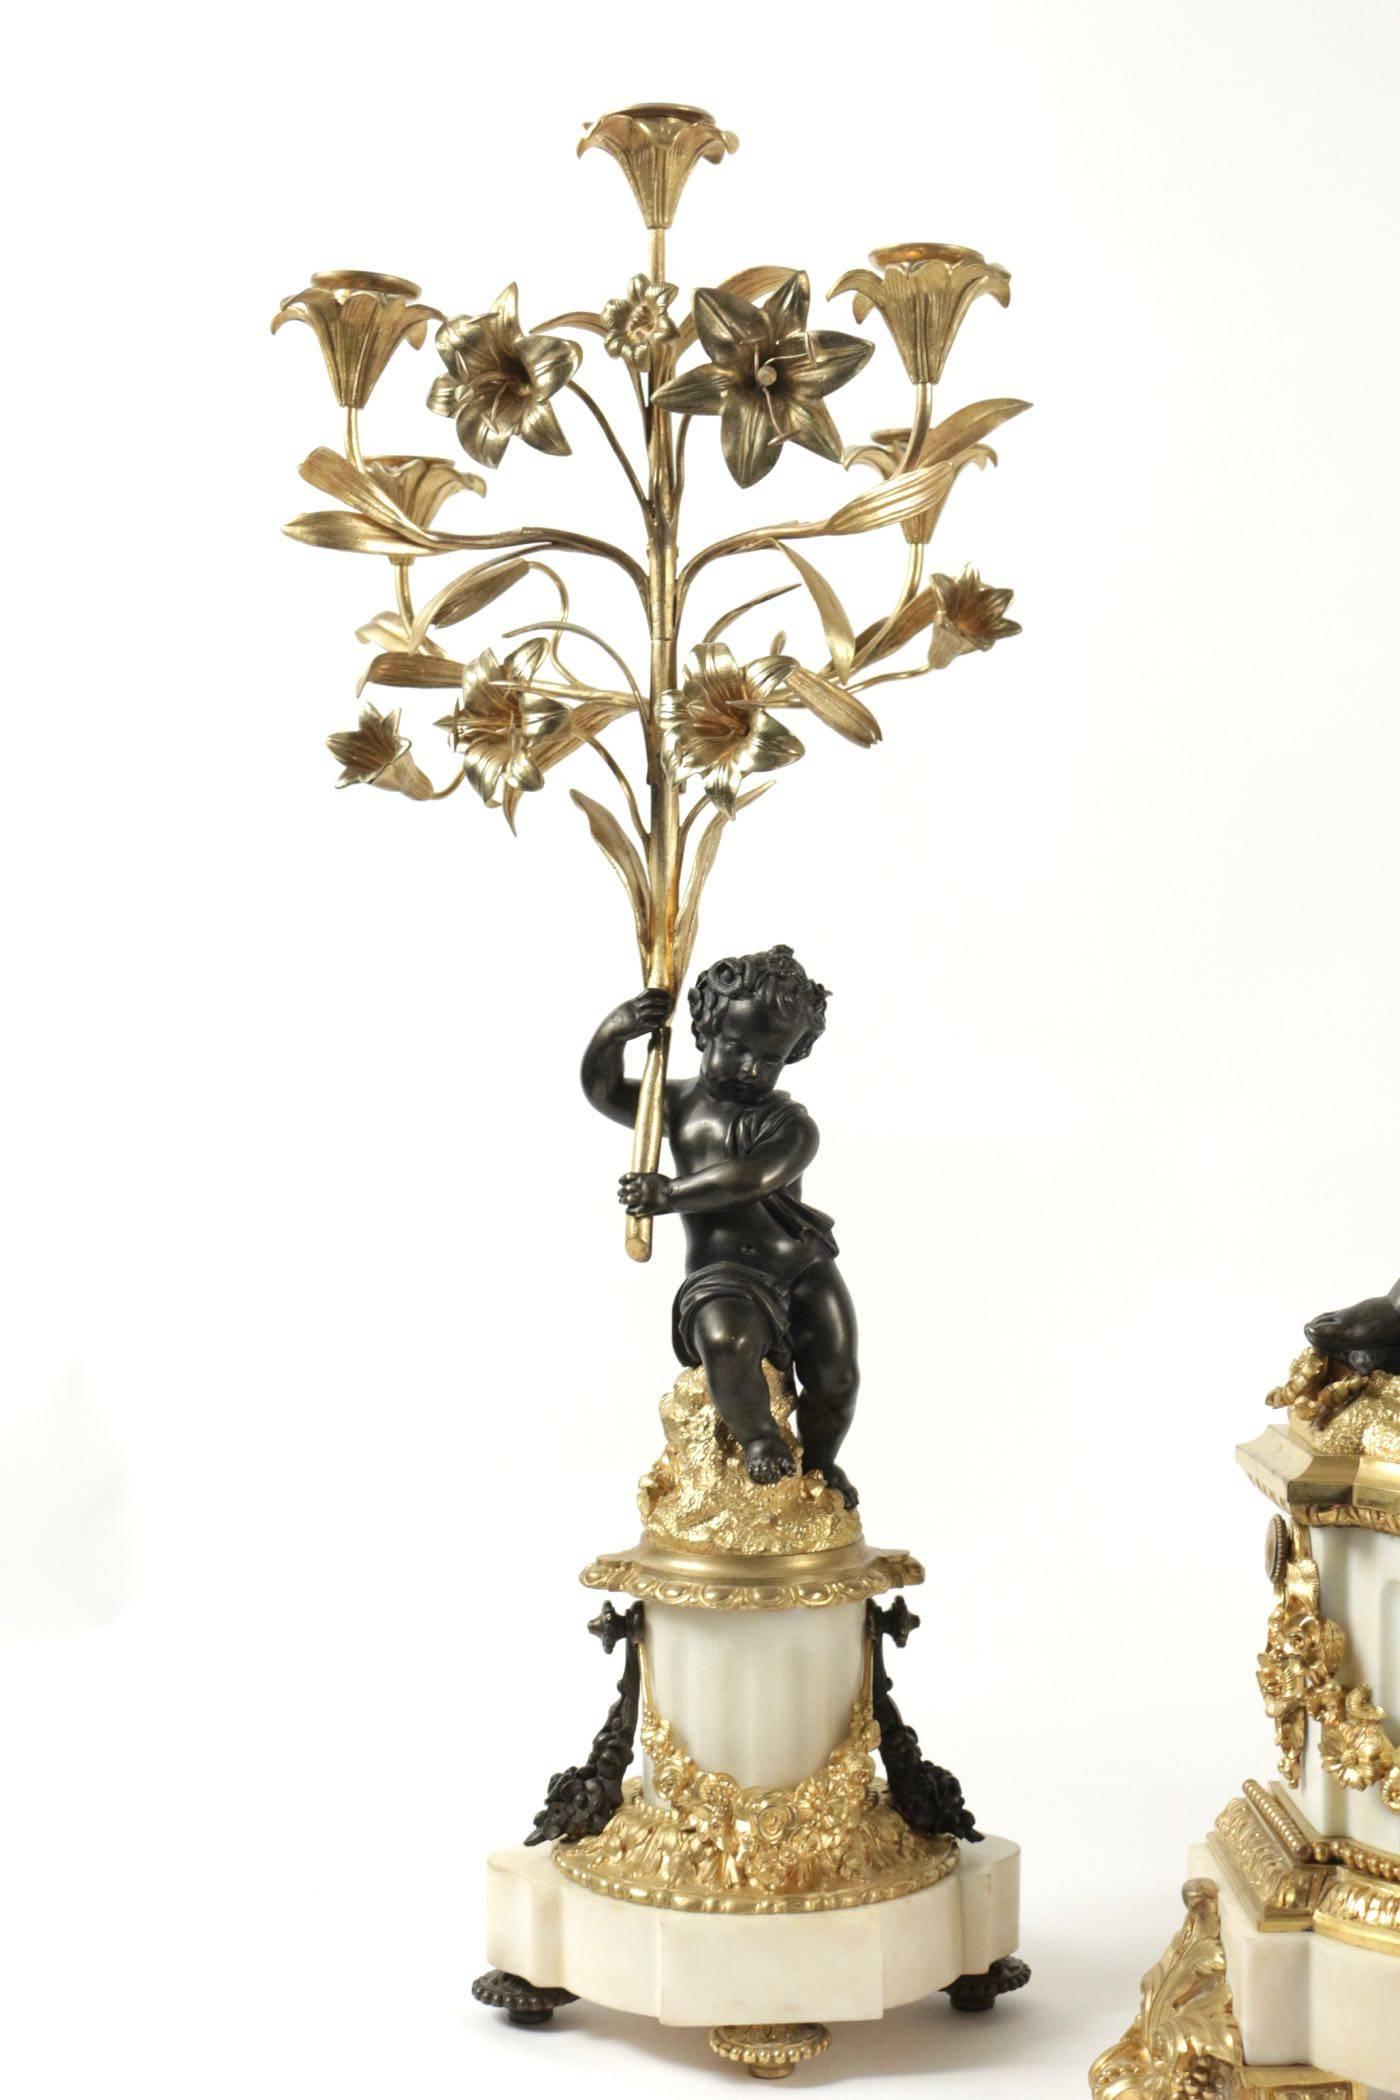 Napoleon III Important Mantle Clock with Matching Candelabras